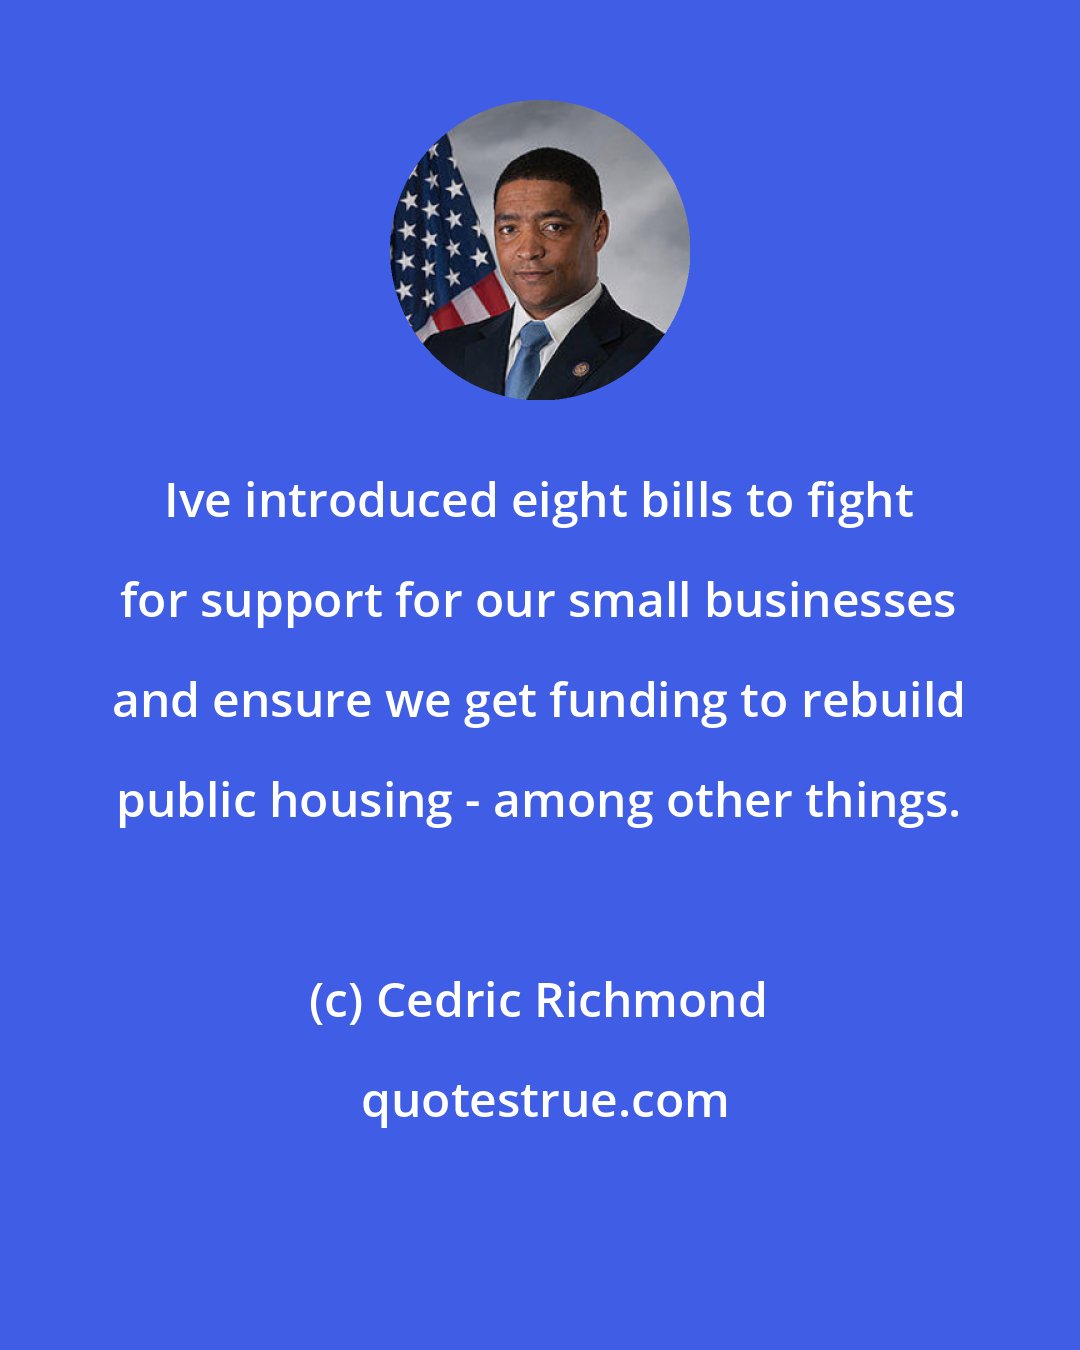 Cedric Richmond: Ive introduced eight bills to fight for support for our small businesses and ensure we get funding to rebuild public housing - among other things.